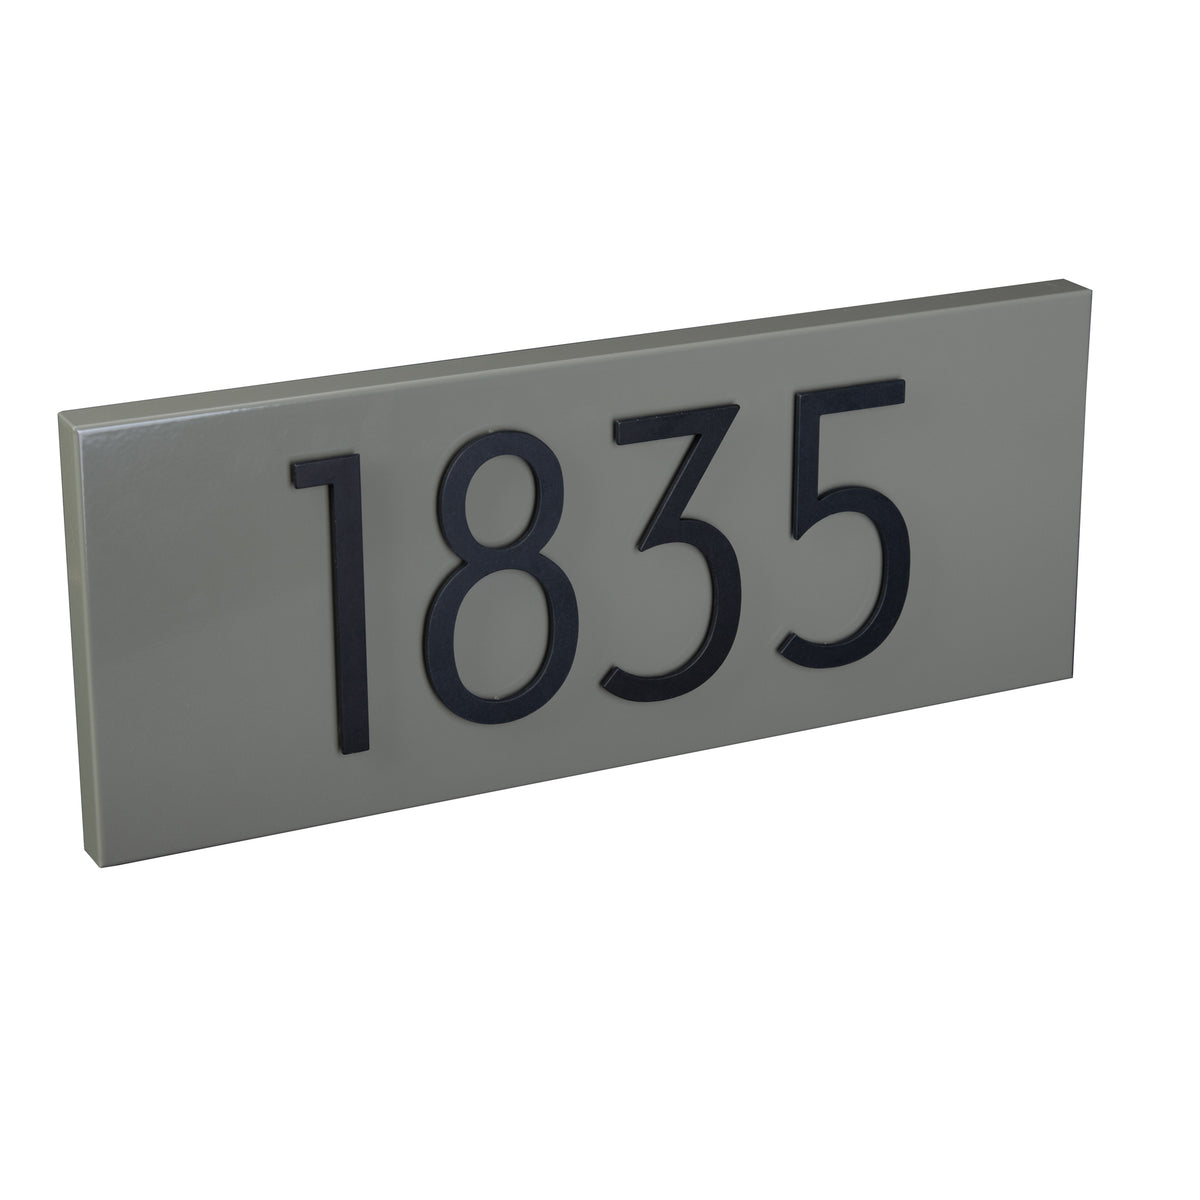 eucalyptus address plaque with black numbers